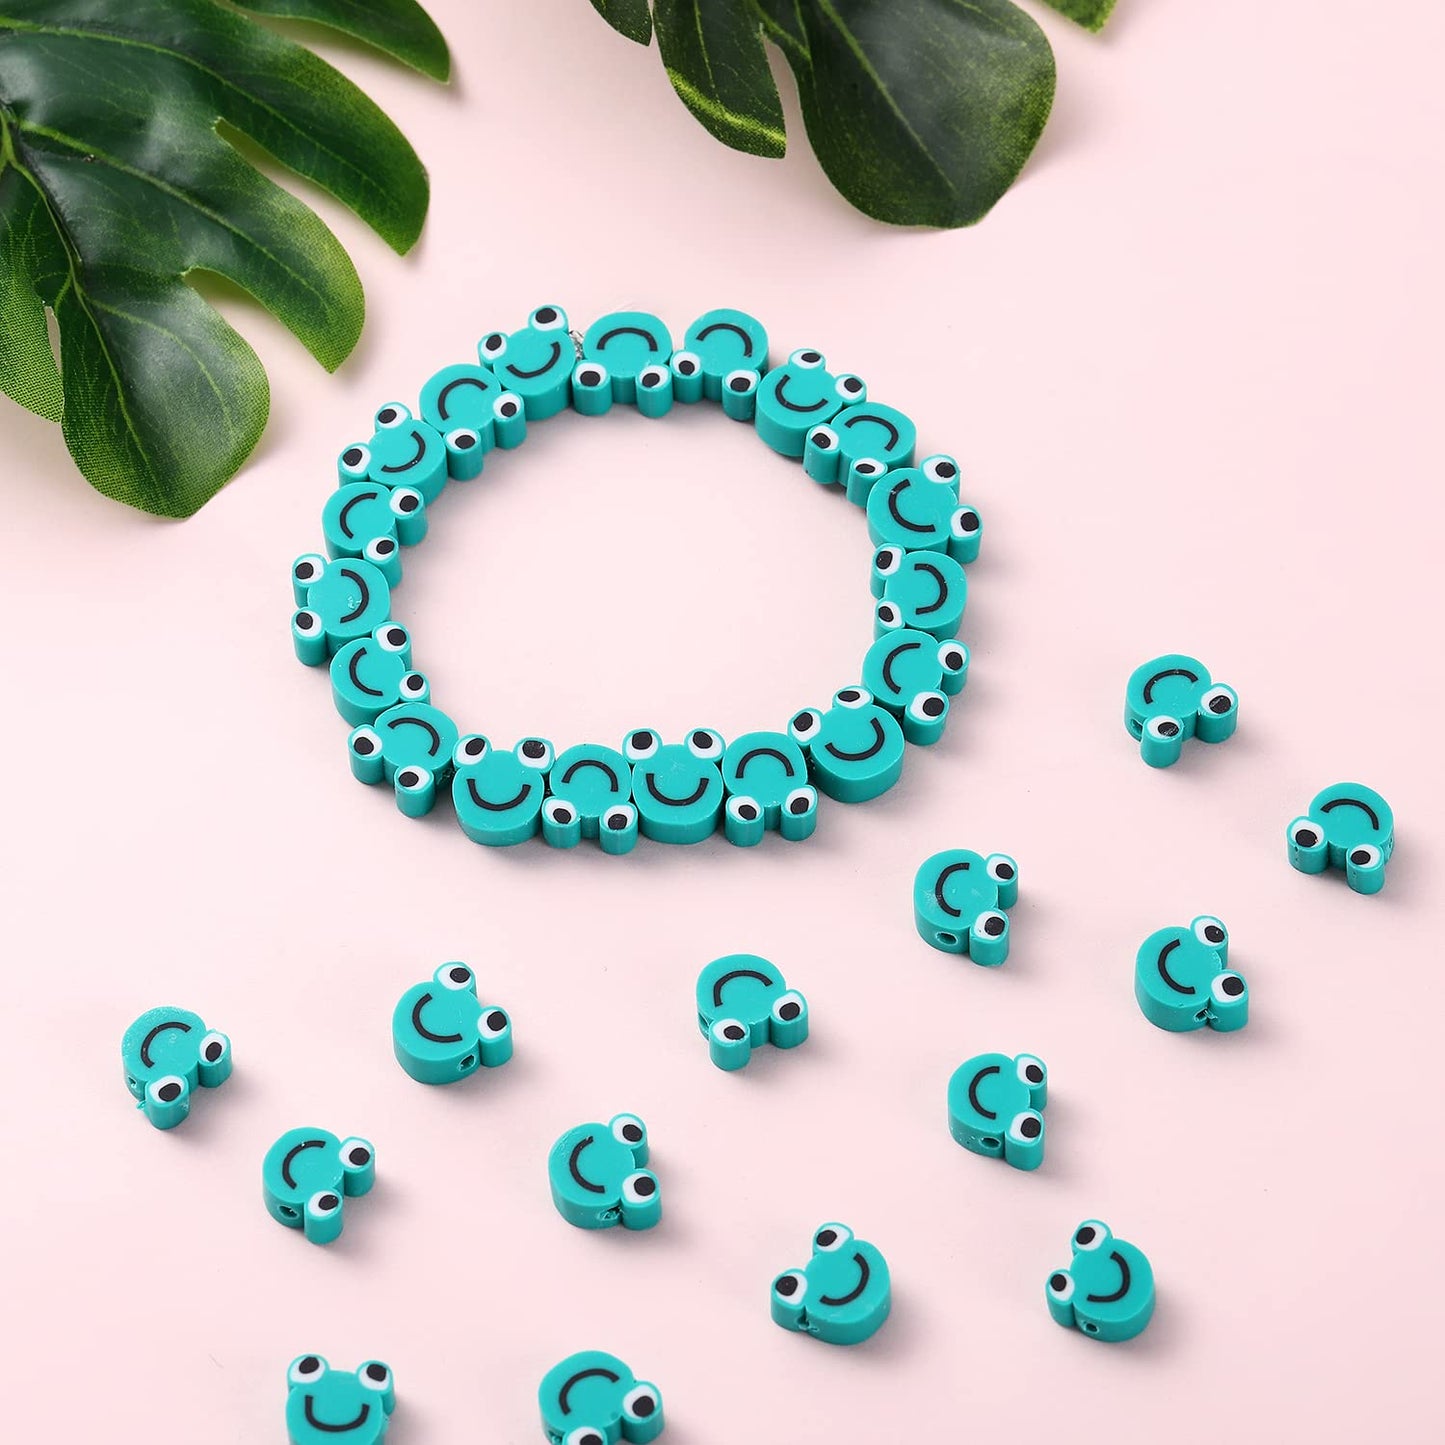 50pcs/lot Cartoon Flowers Evil Eye Polymer Clay Spacer Beads for Women Girls Jewelry Making DIY Bracelet Necklace  Accessories